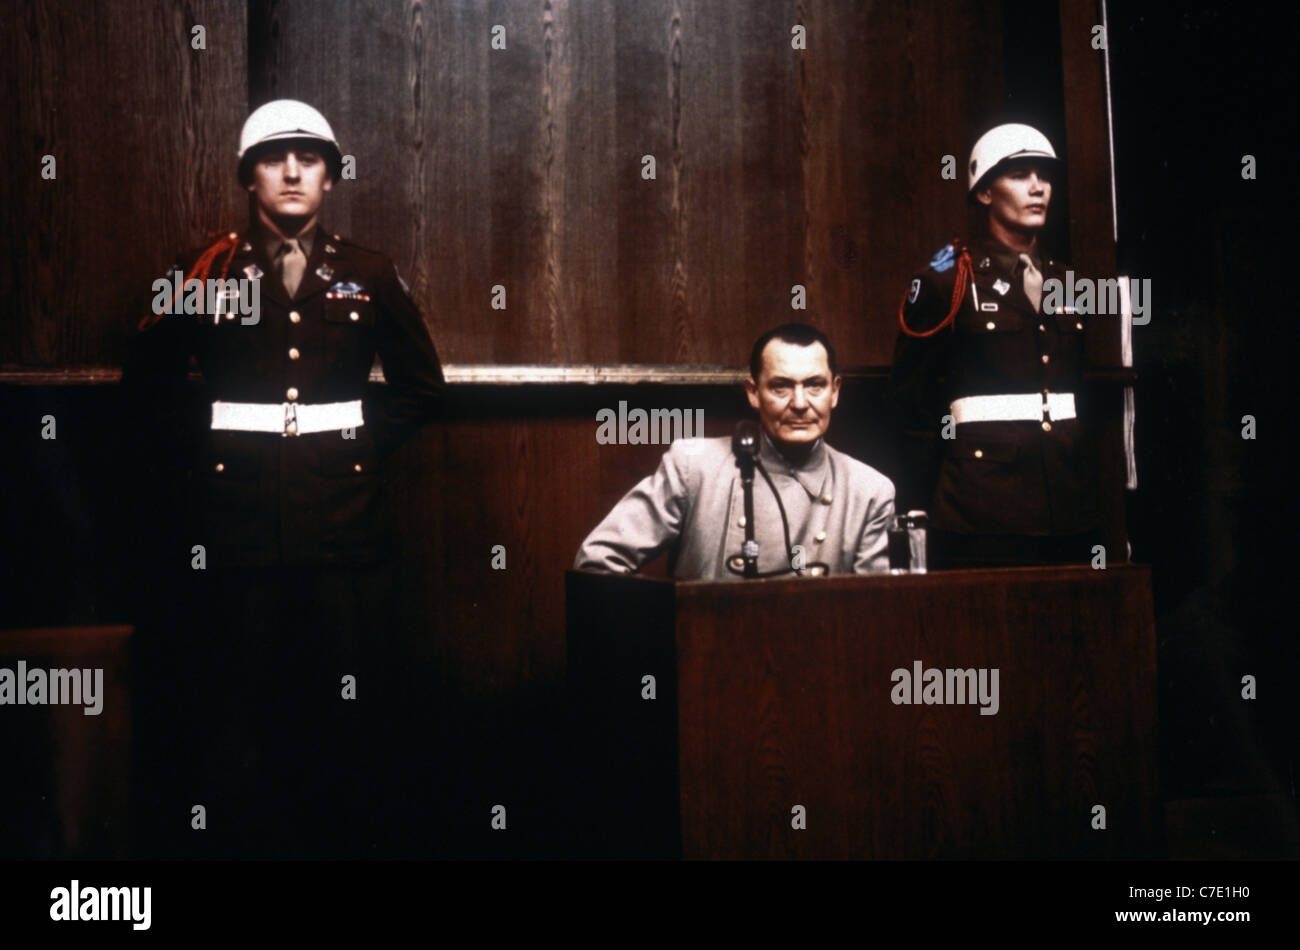 German Field Marshal Hermann Goering under guard during his trail for crimes against humanity Nuremberg, Germany. Stock Photo